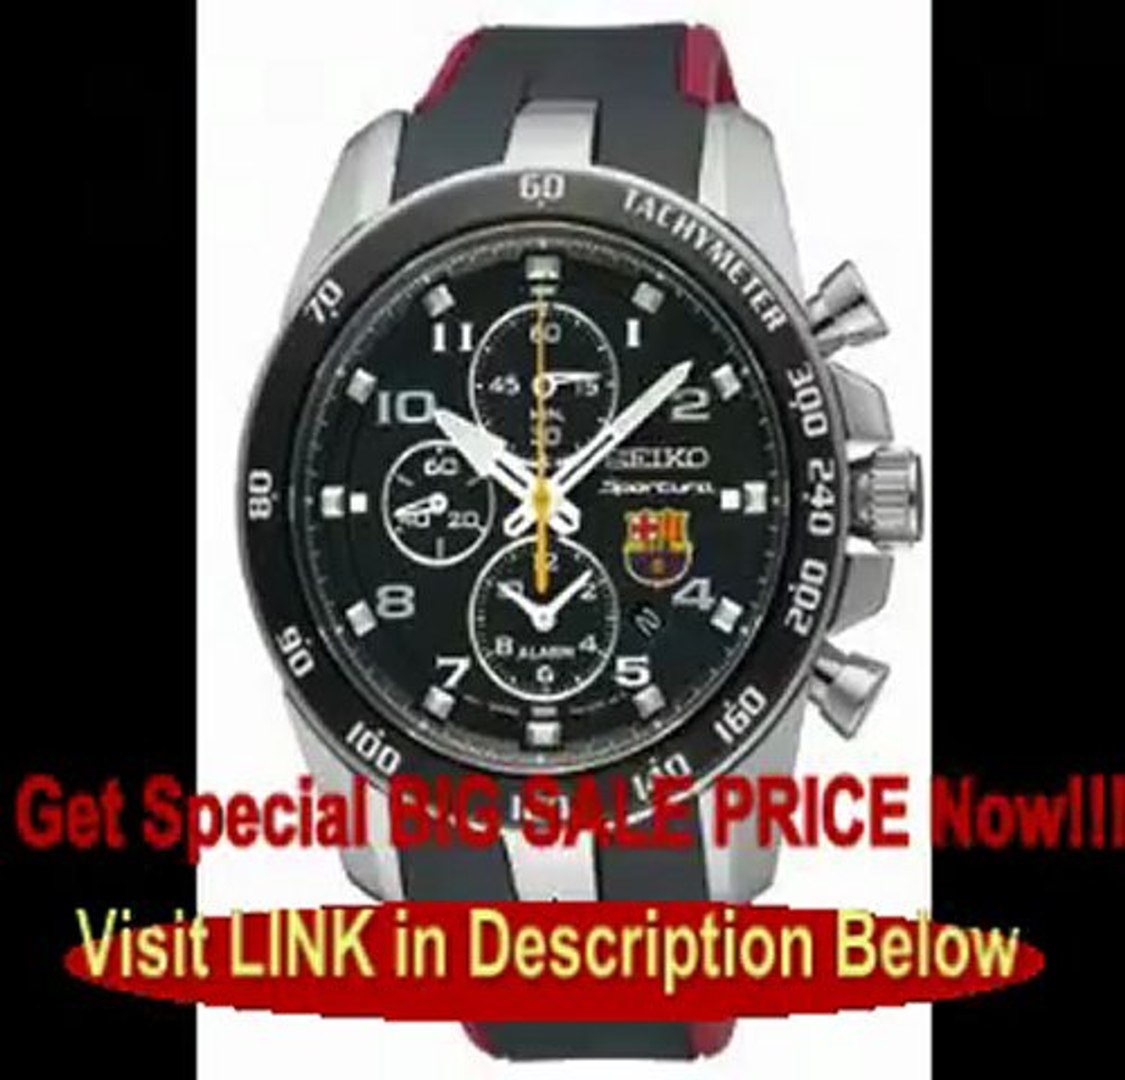 New Seiko Mens FC Barcelona Limited Edition Sportura Chronograph SNAE93  Watch - video Dailymotion